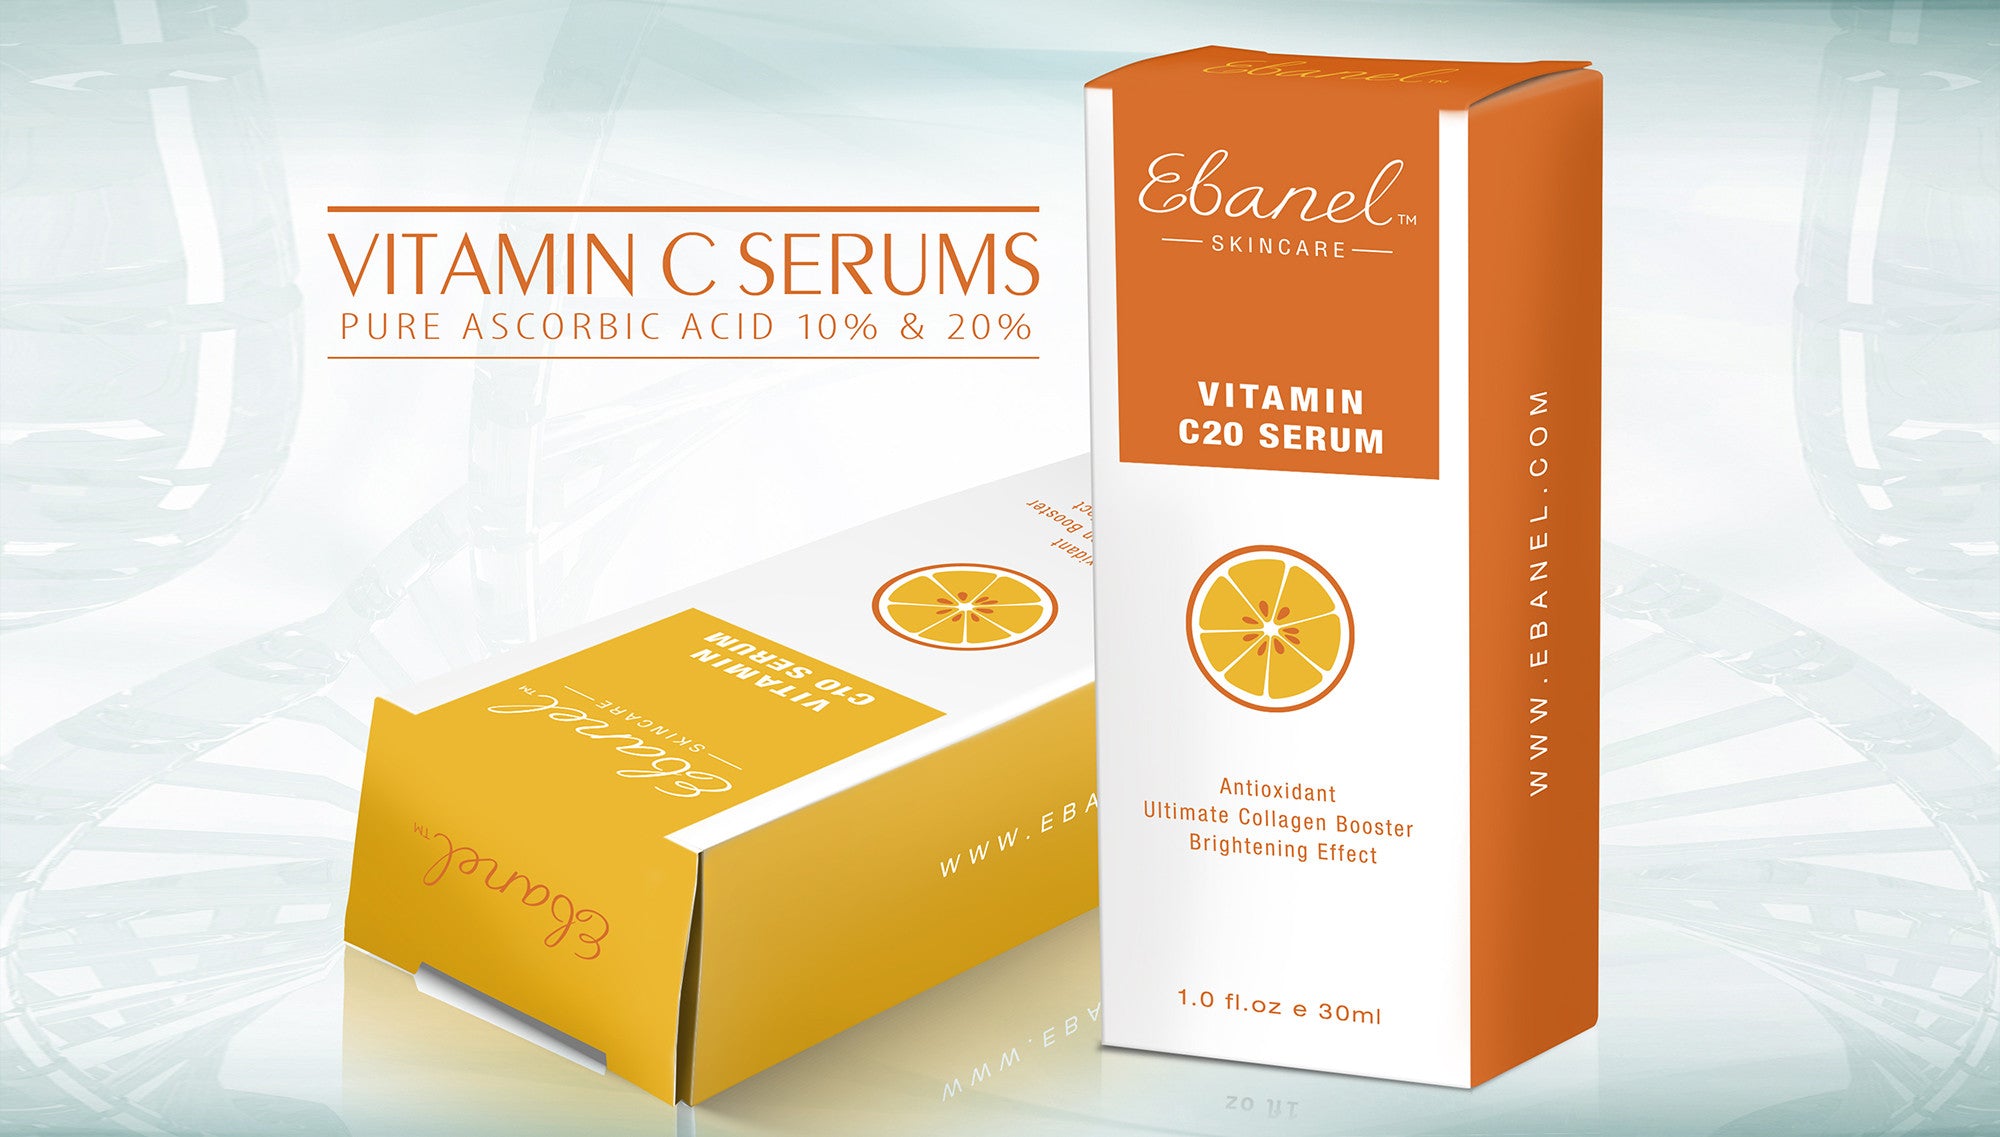 Doctor-Recommended Vitamin C Serum for Anti-Aging Skincare